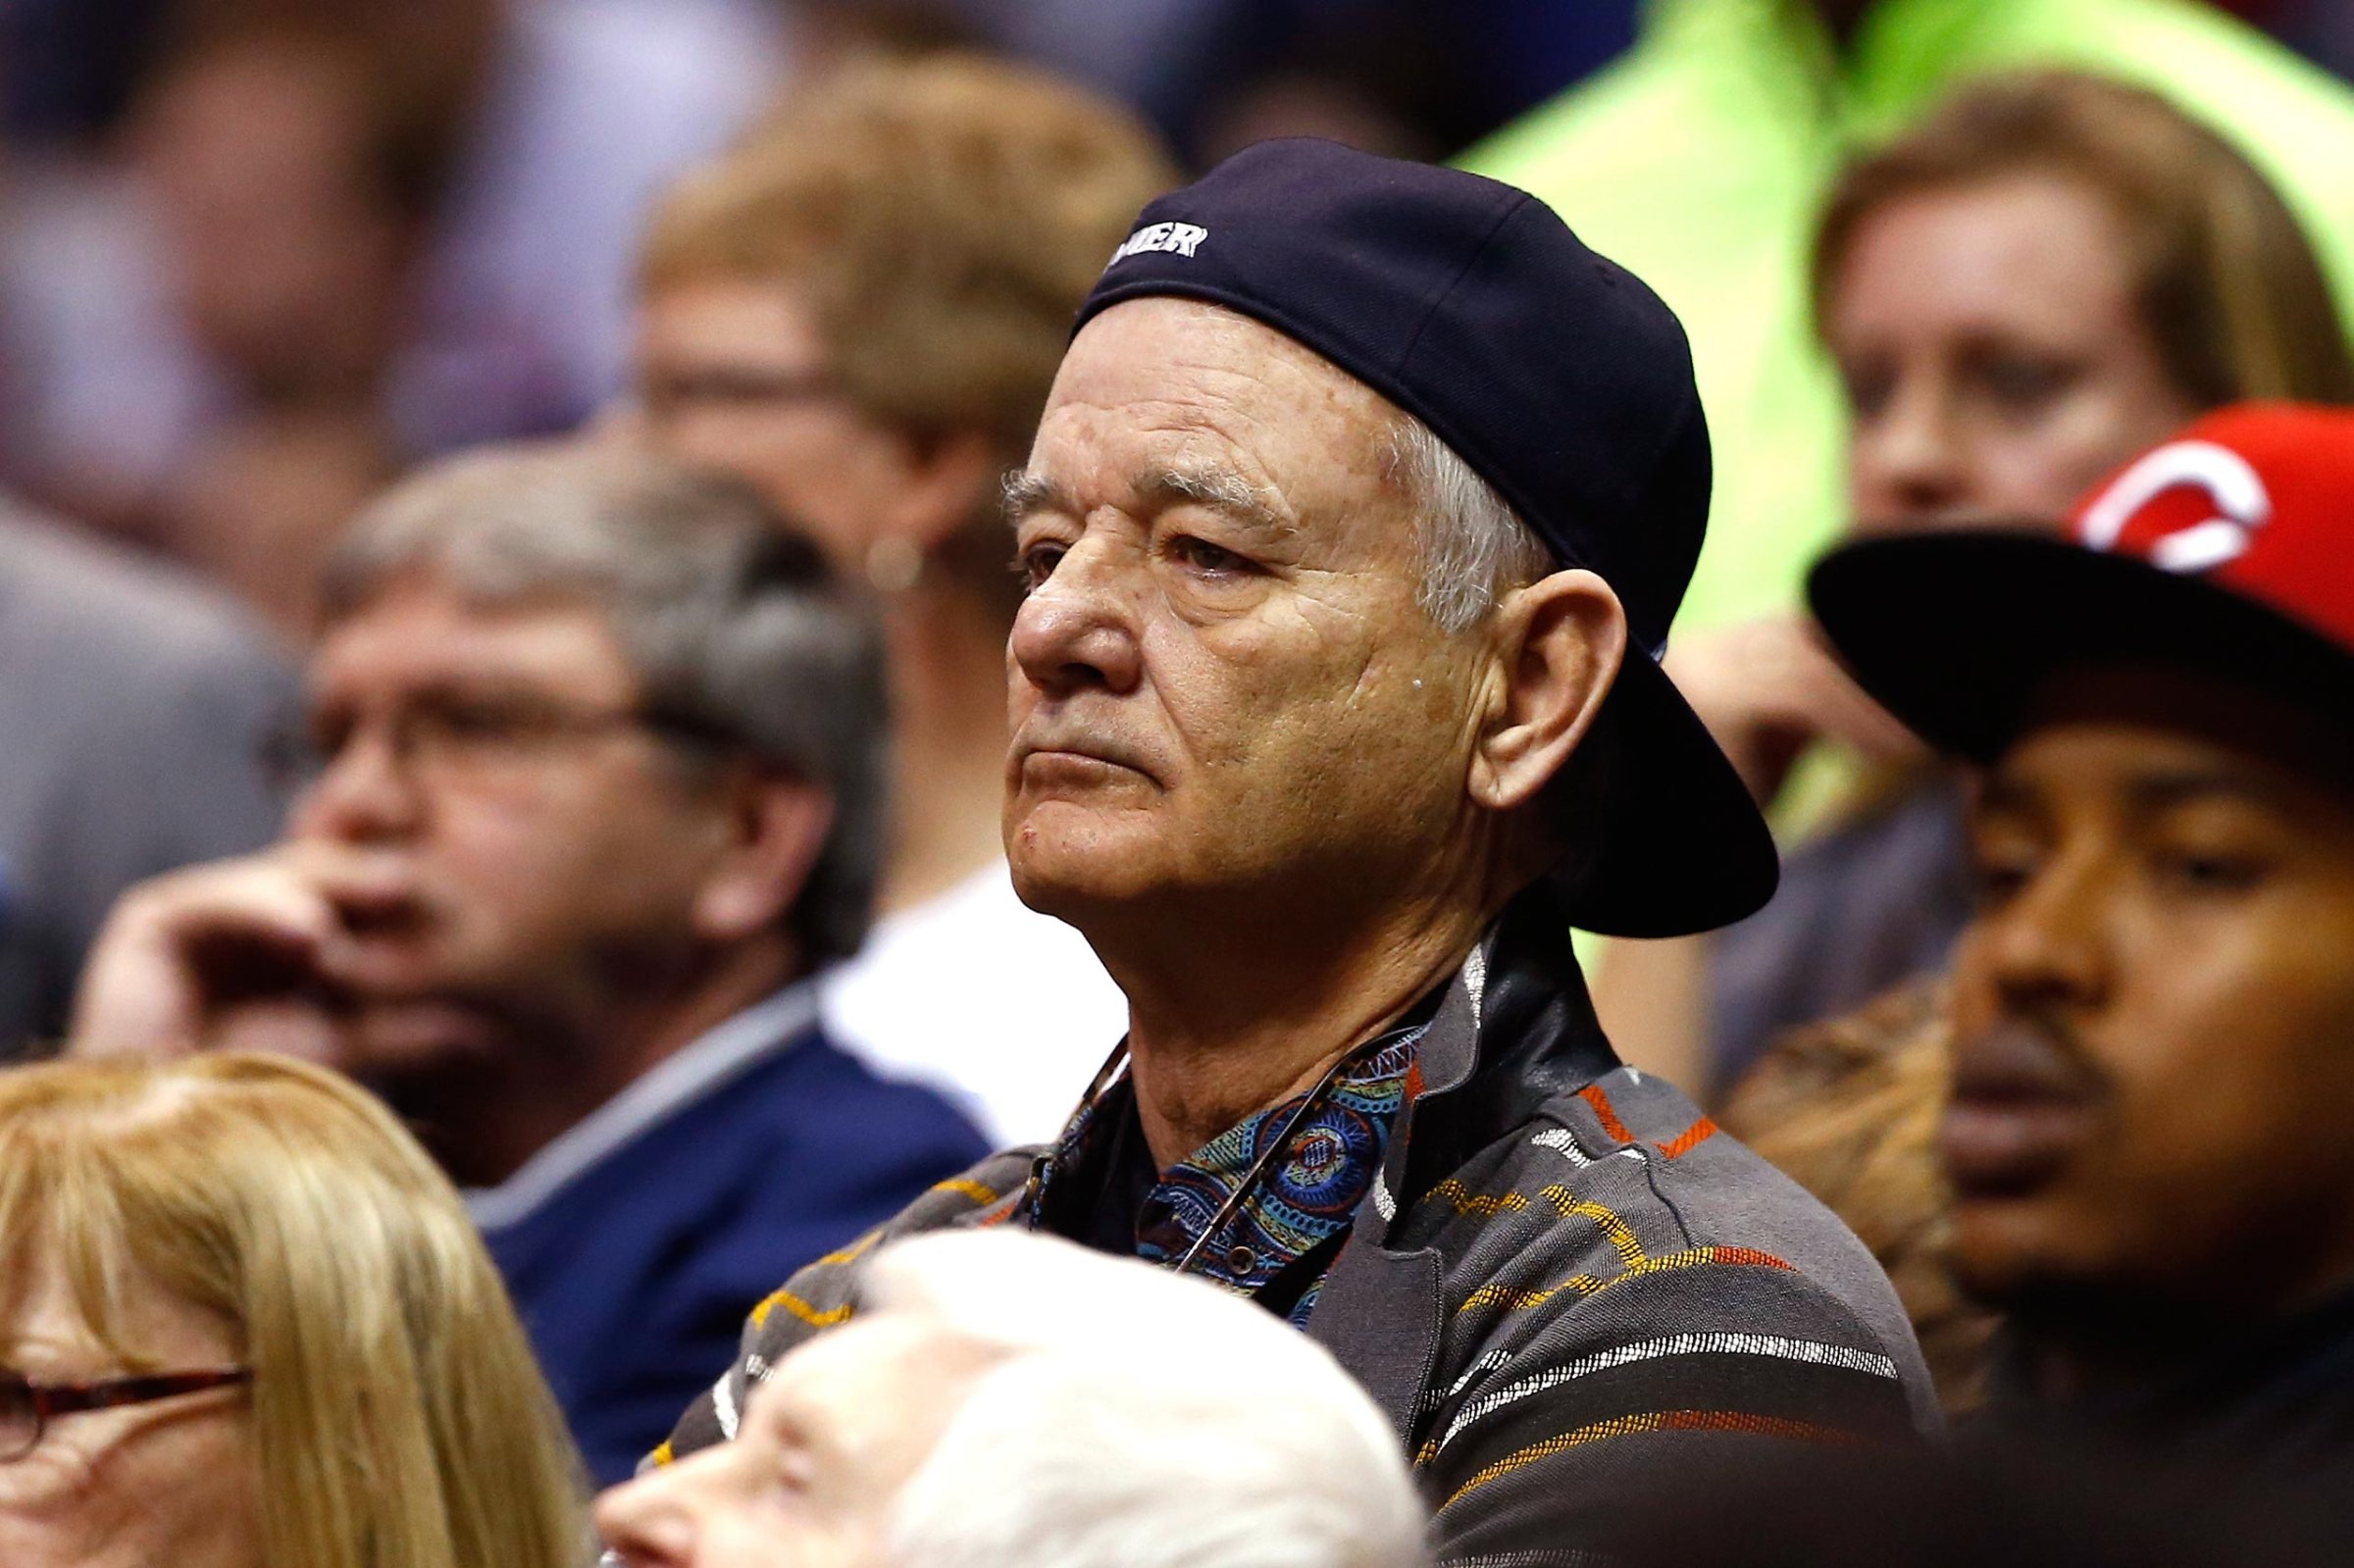 Actor Bill Murray attends the game between the Xavier Musketeers and the Wisconsin Badgers during the second round of the 2016 NCAA Men's Basketball Tournament at Scottrade Center in St. Louis, Mo., March 20, 2016. Murray's son Luke Murray is an assistant coach for the Musketeers.